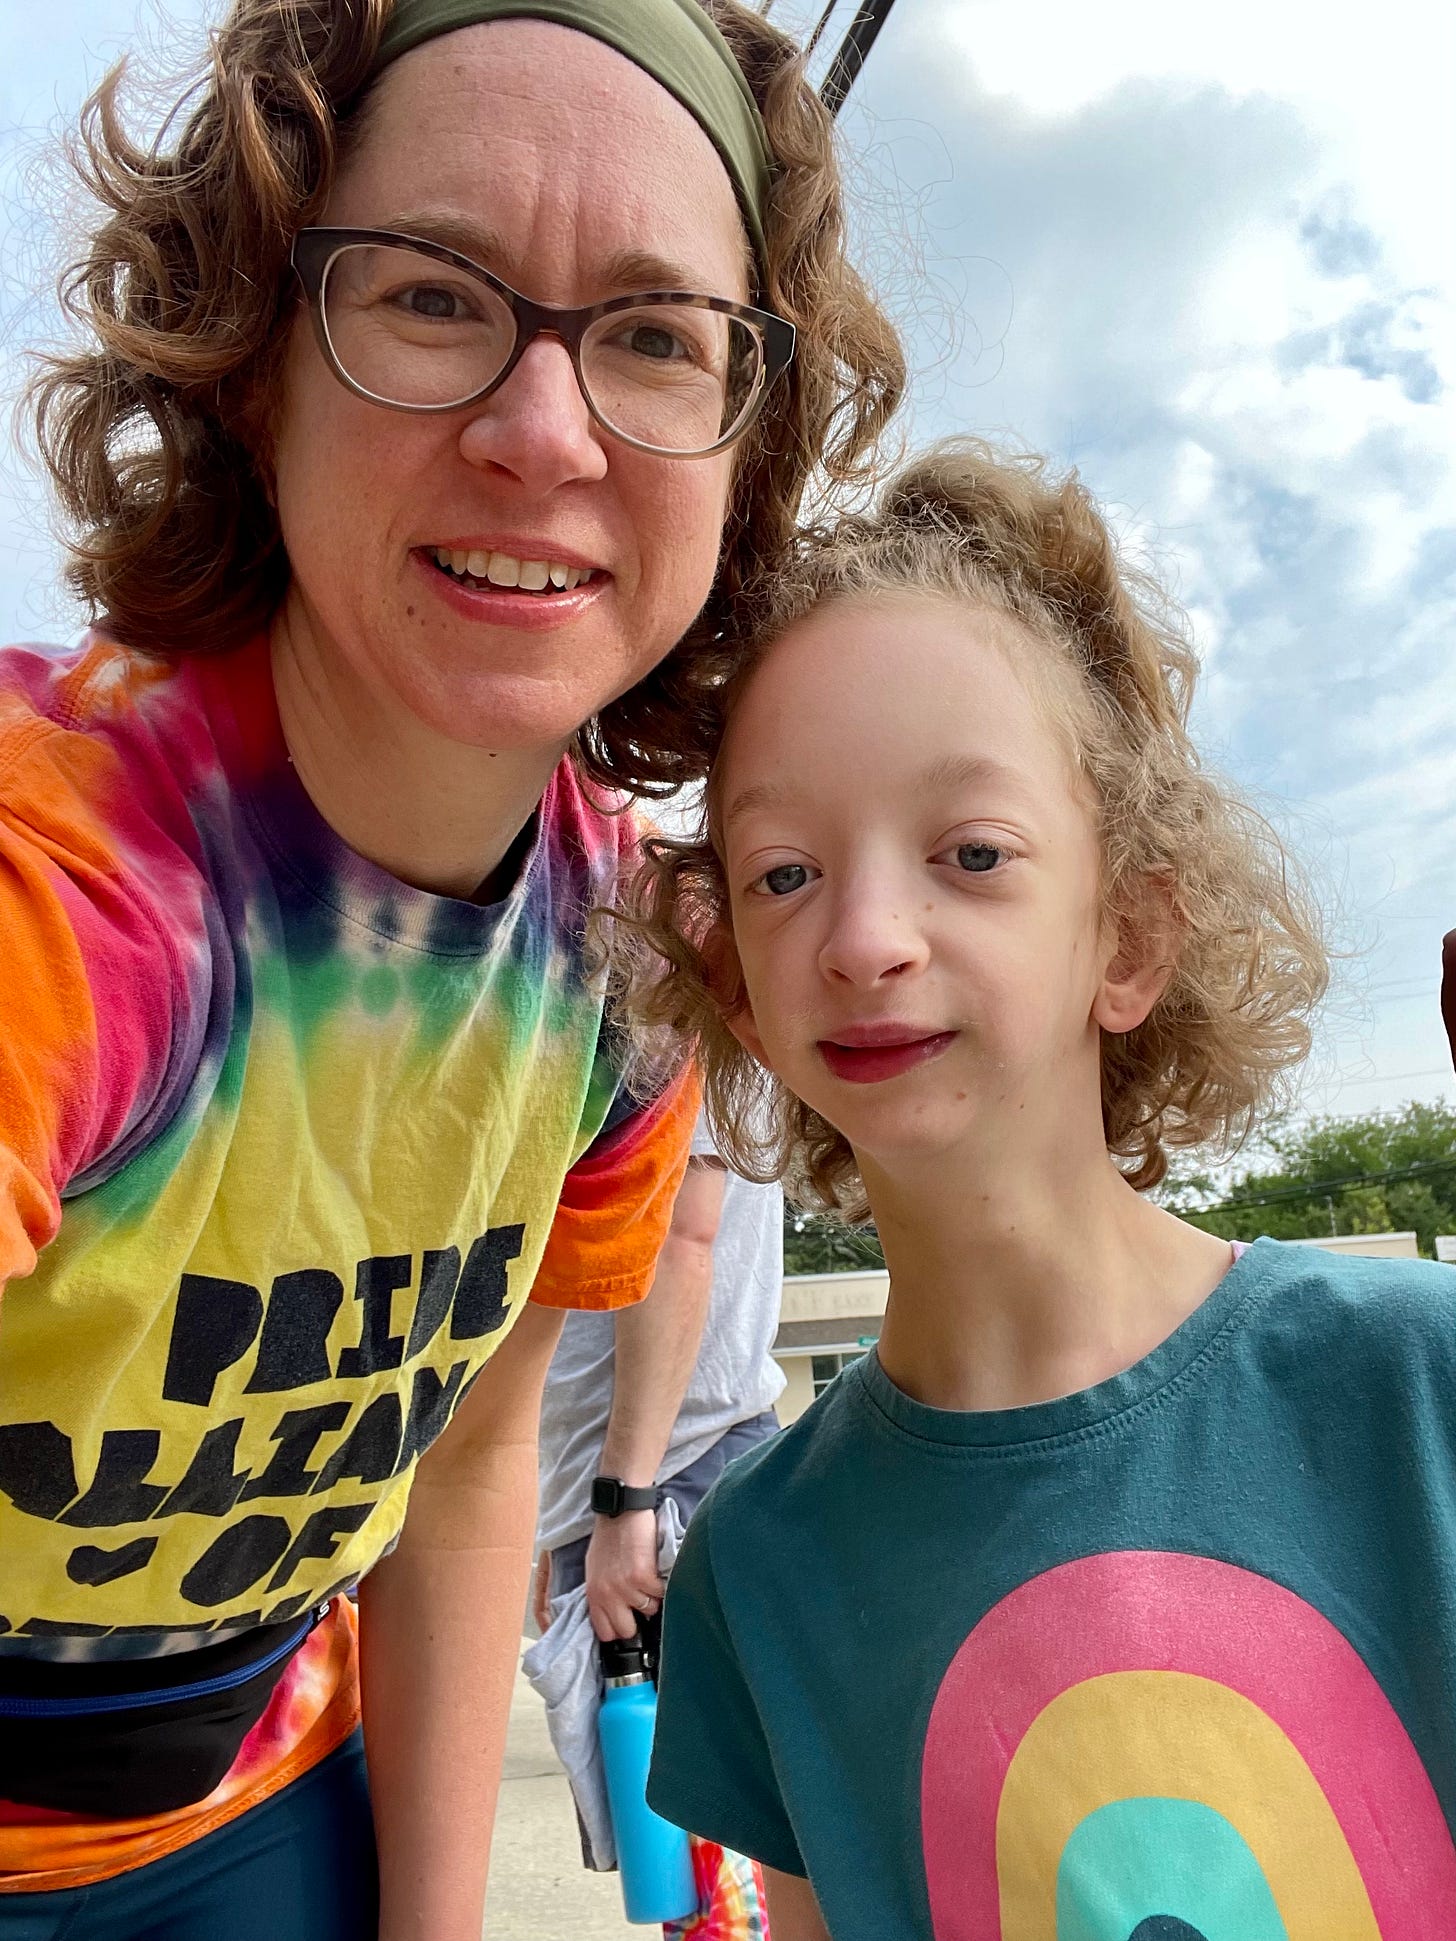 Selfie of a middle-aged woman in glasses wearing a rainbow tie-dye pride shirt, beside a lean kid with curly chin-length hair and a top-ponytail, also wearing a rainbow shirt.